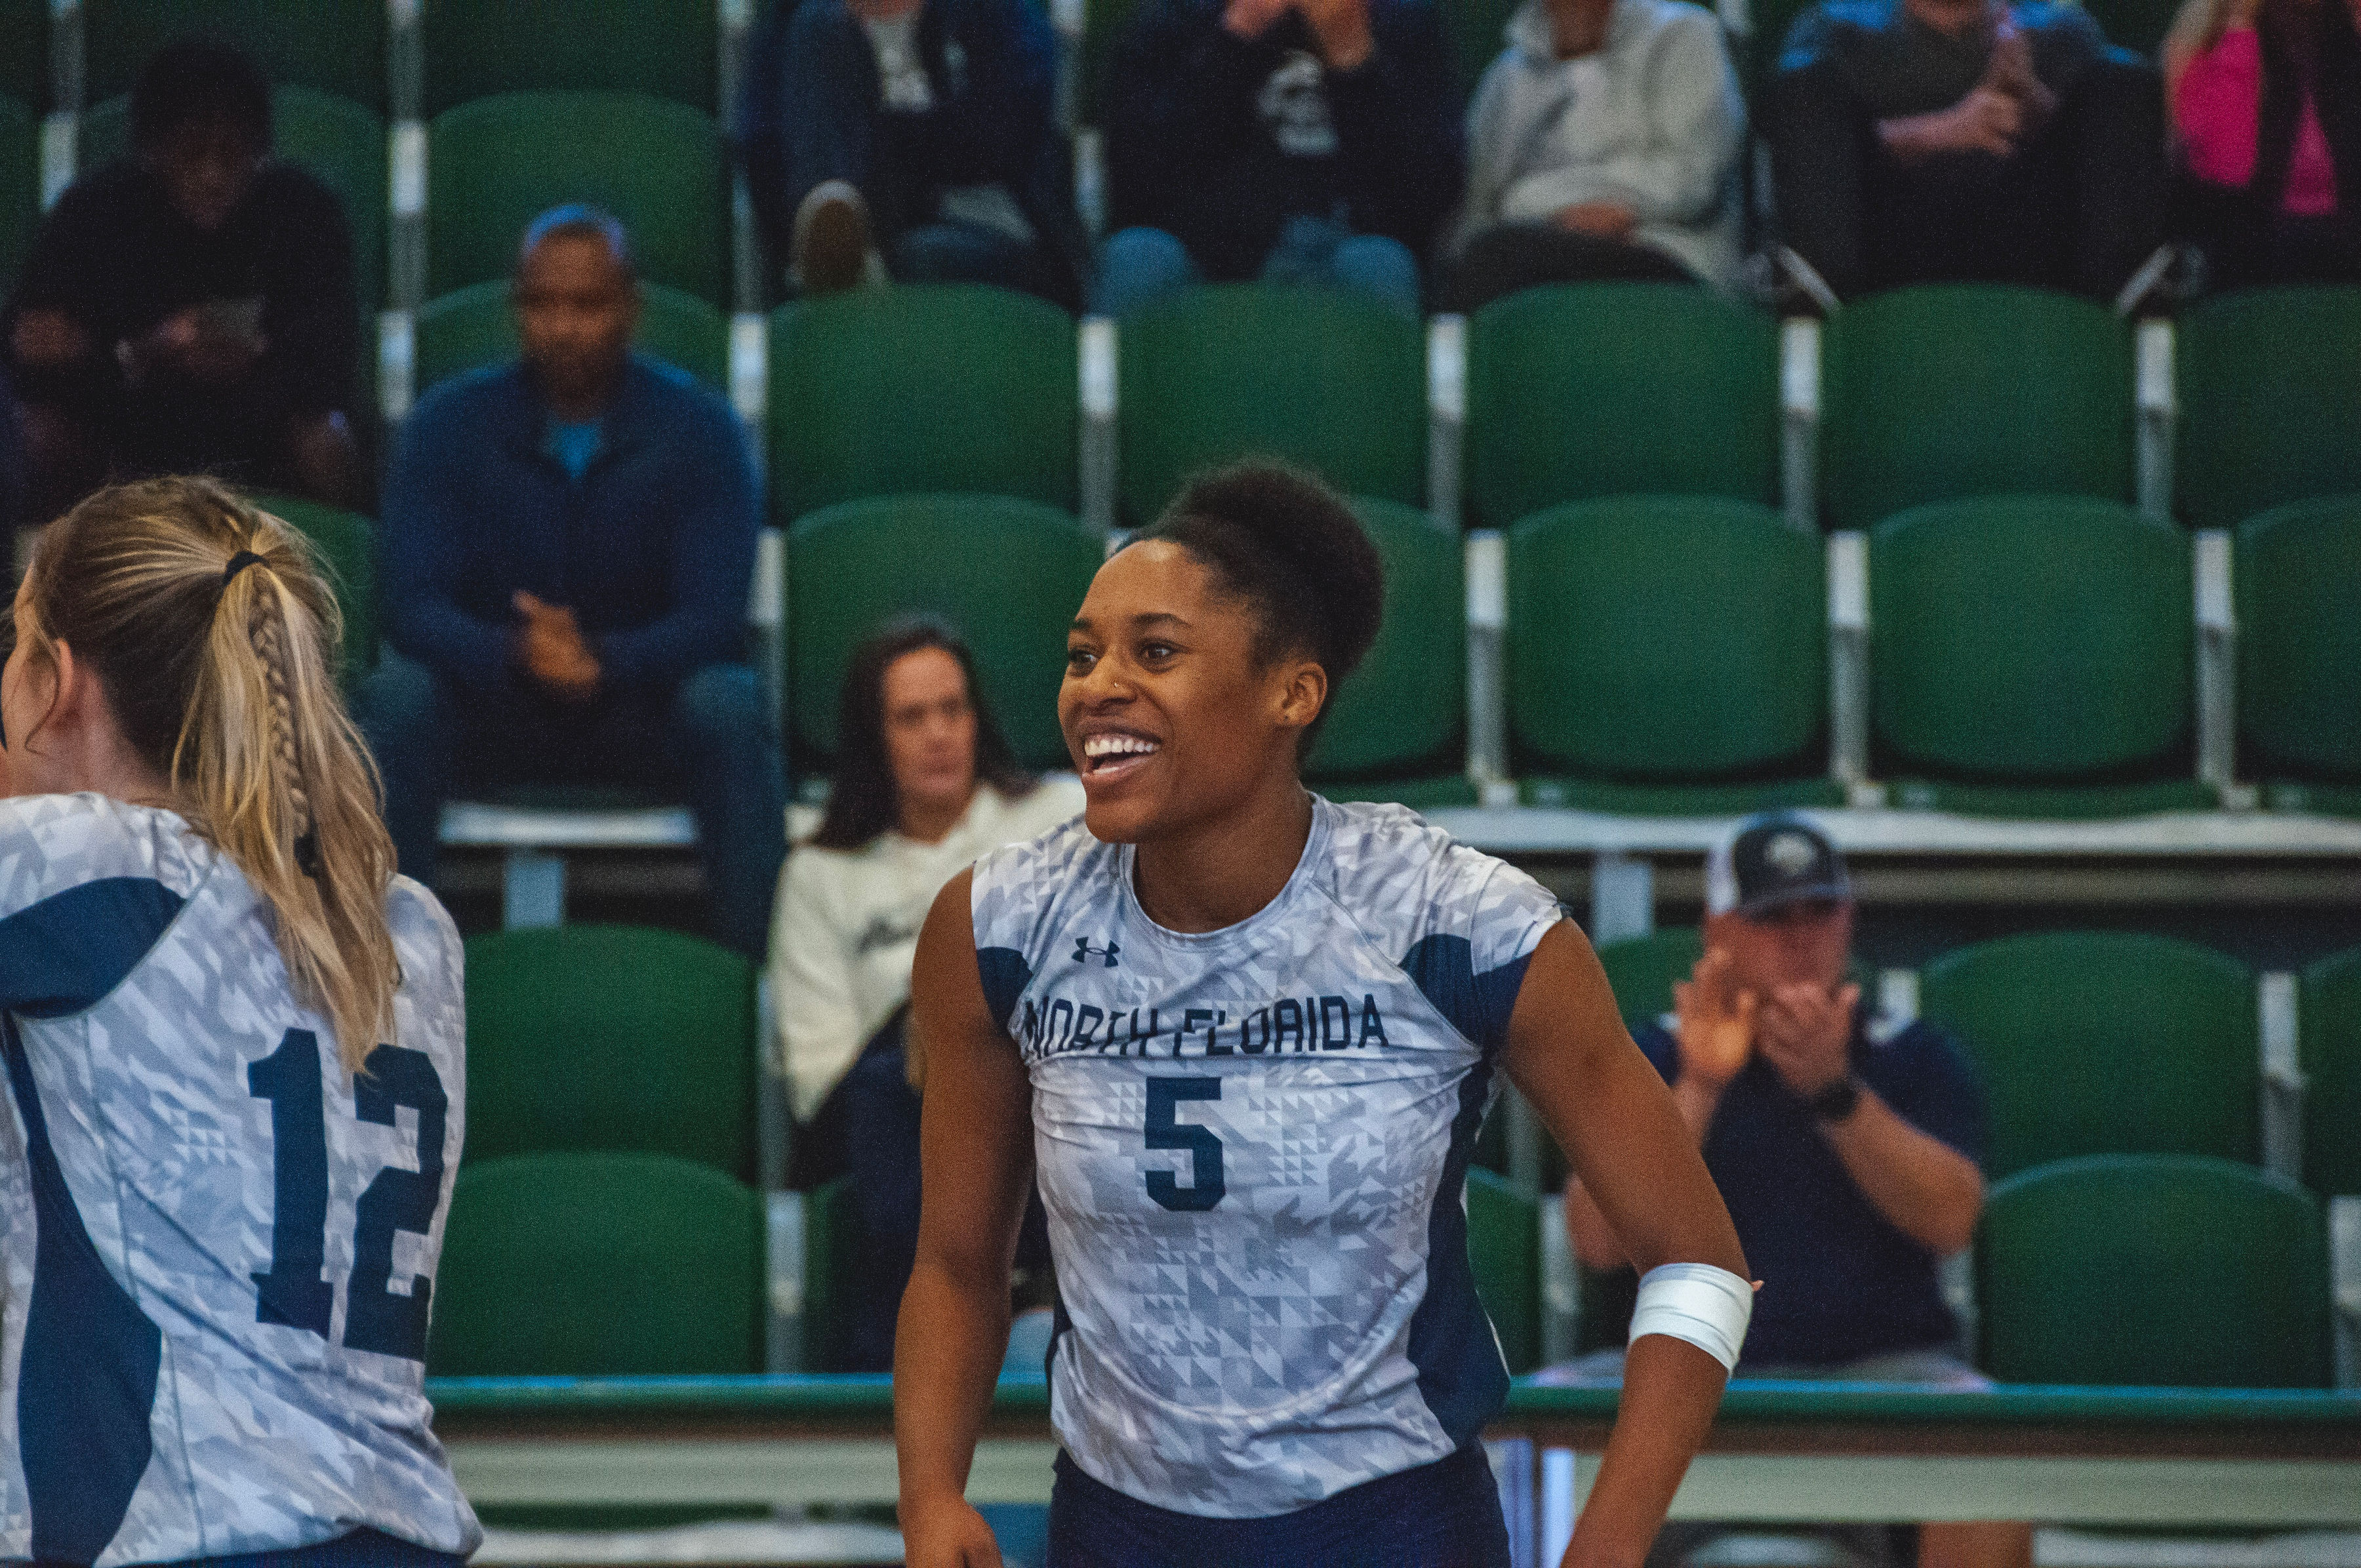 UNF volleyball player smiling on the court